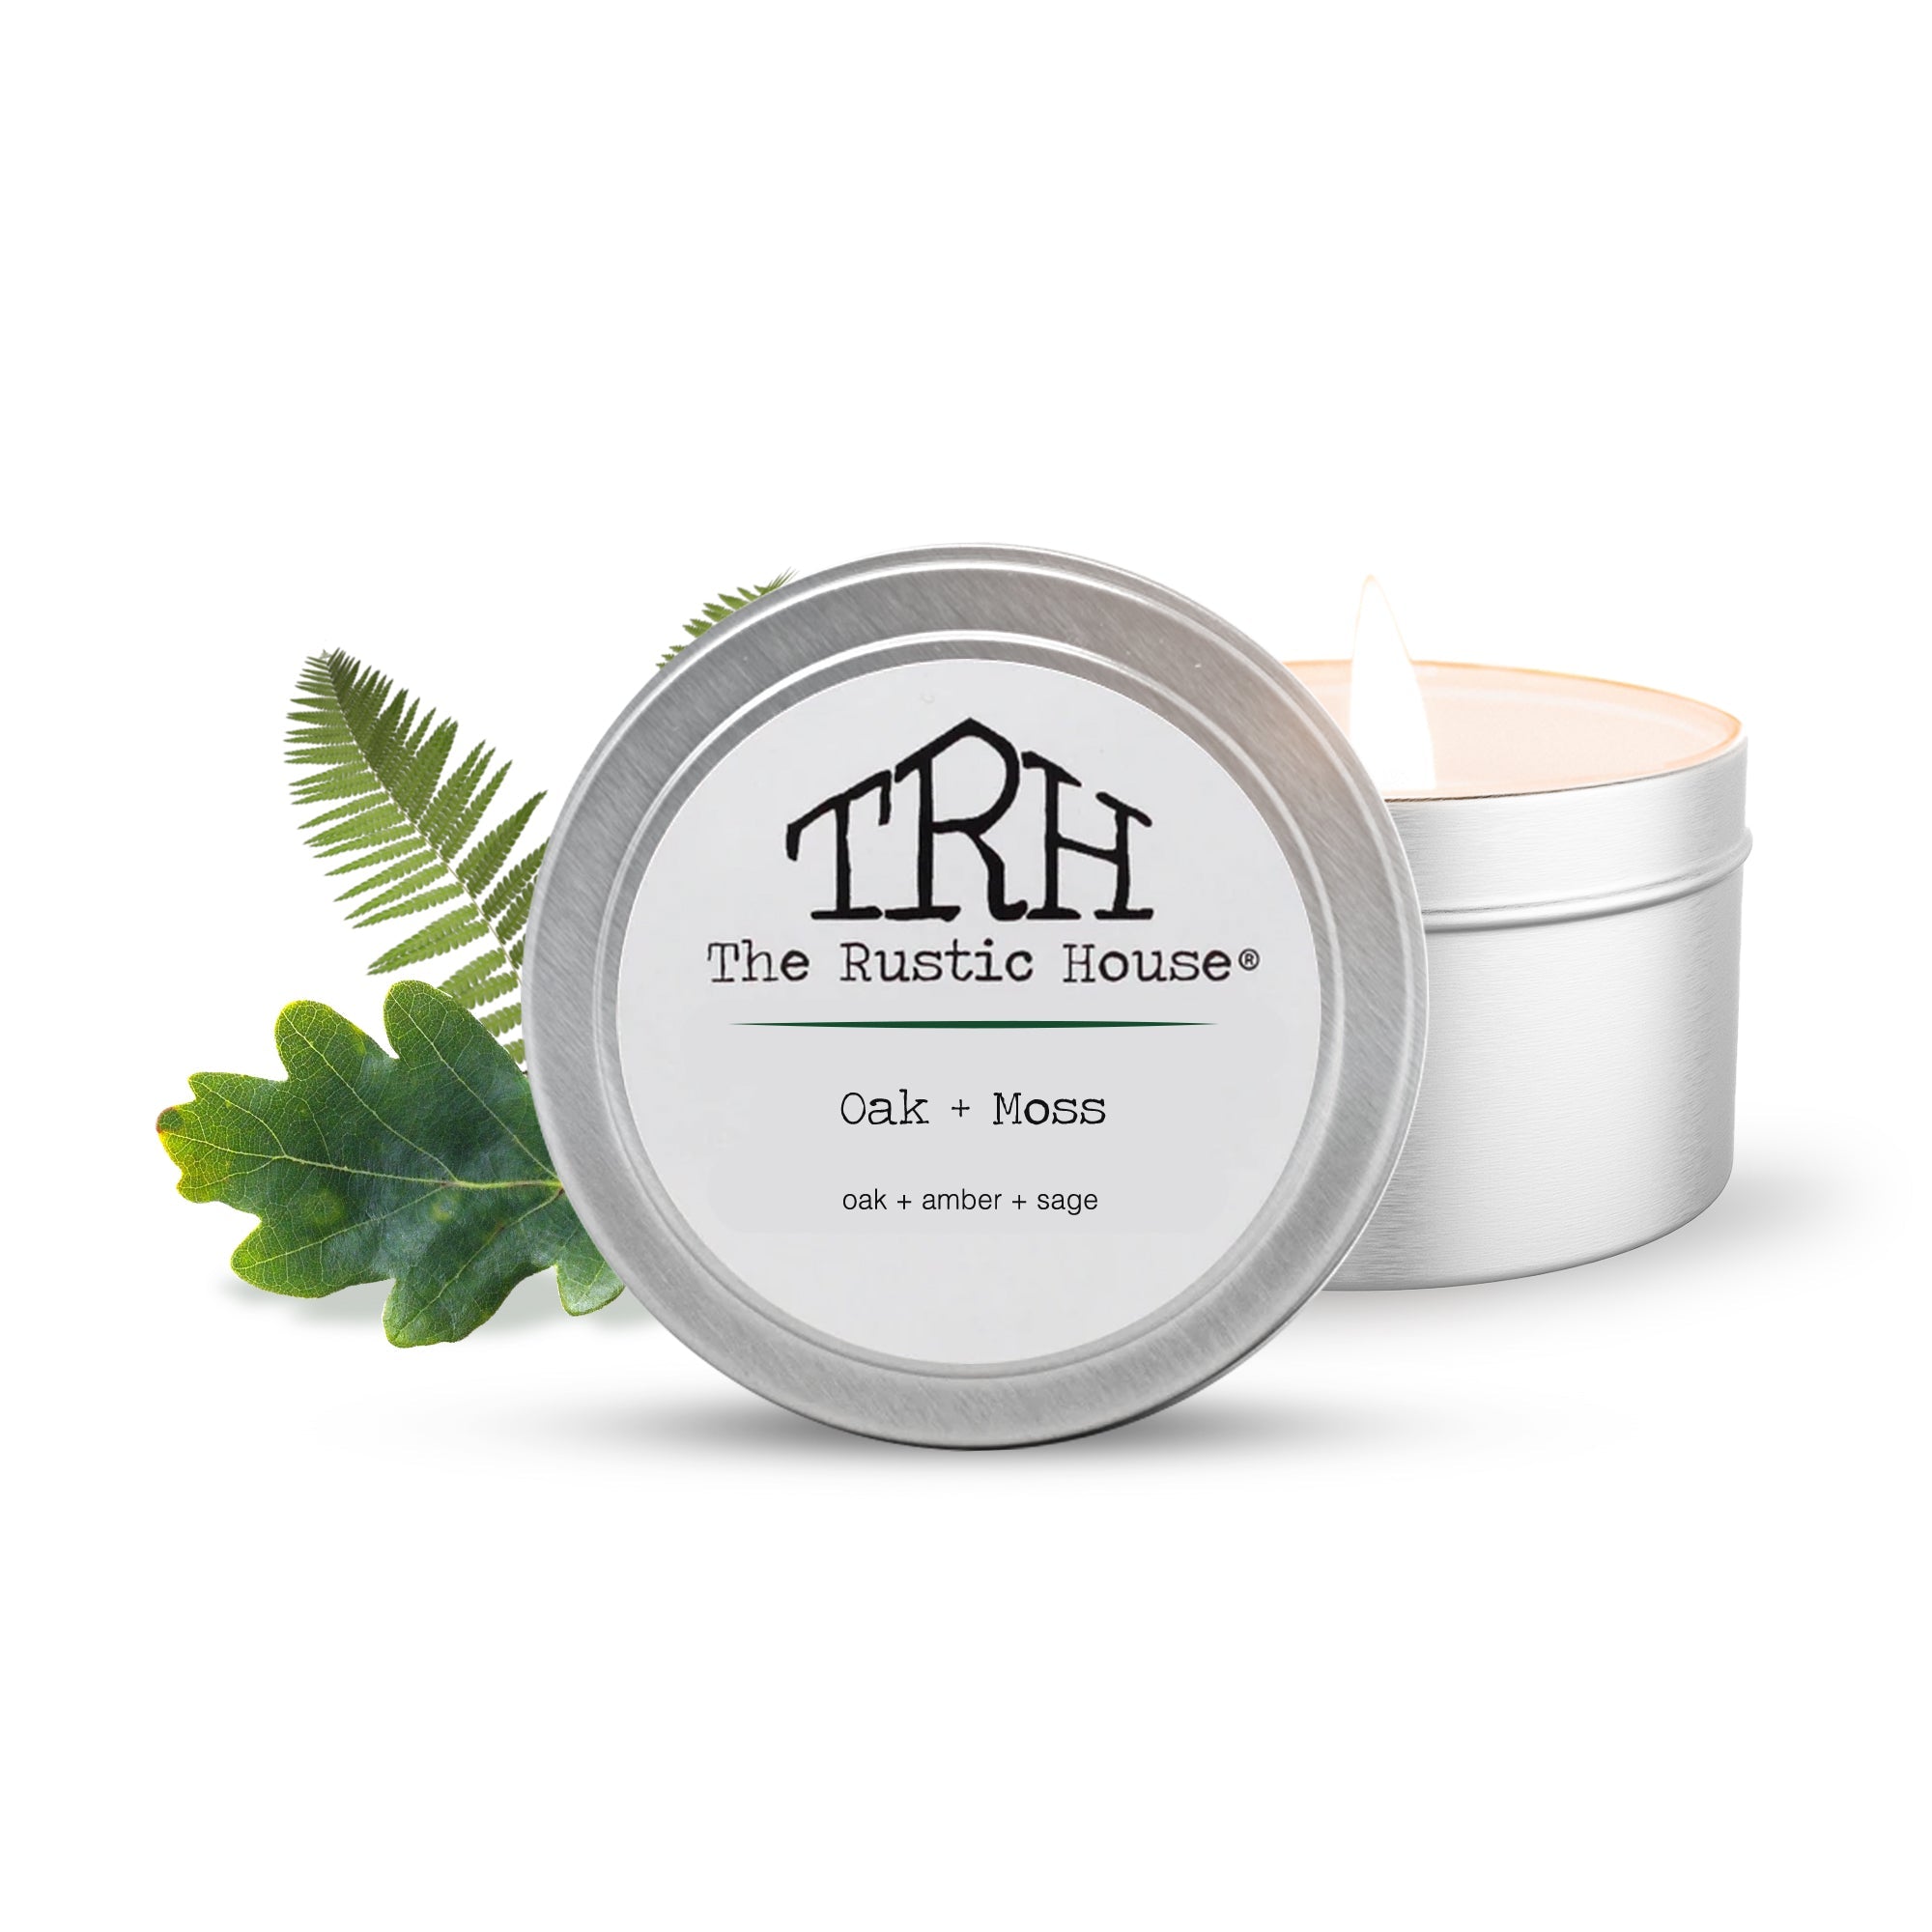 Oak + Moss Travel Tin Candle | The Rustic House